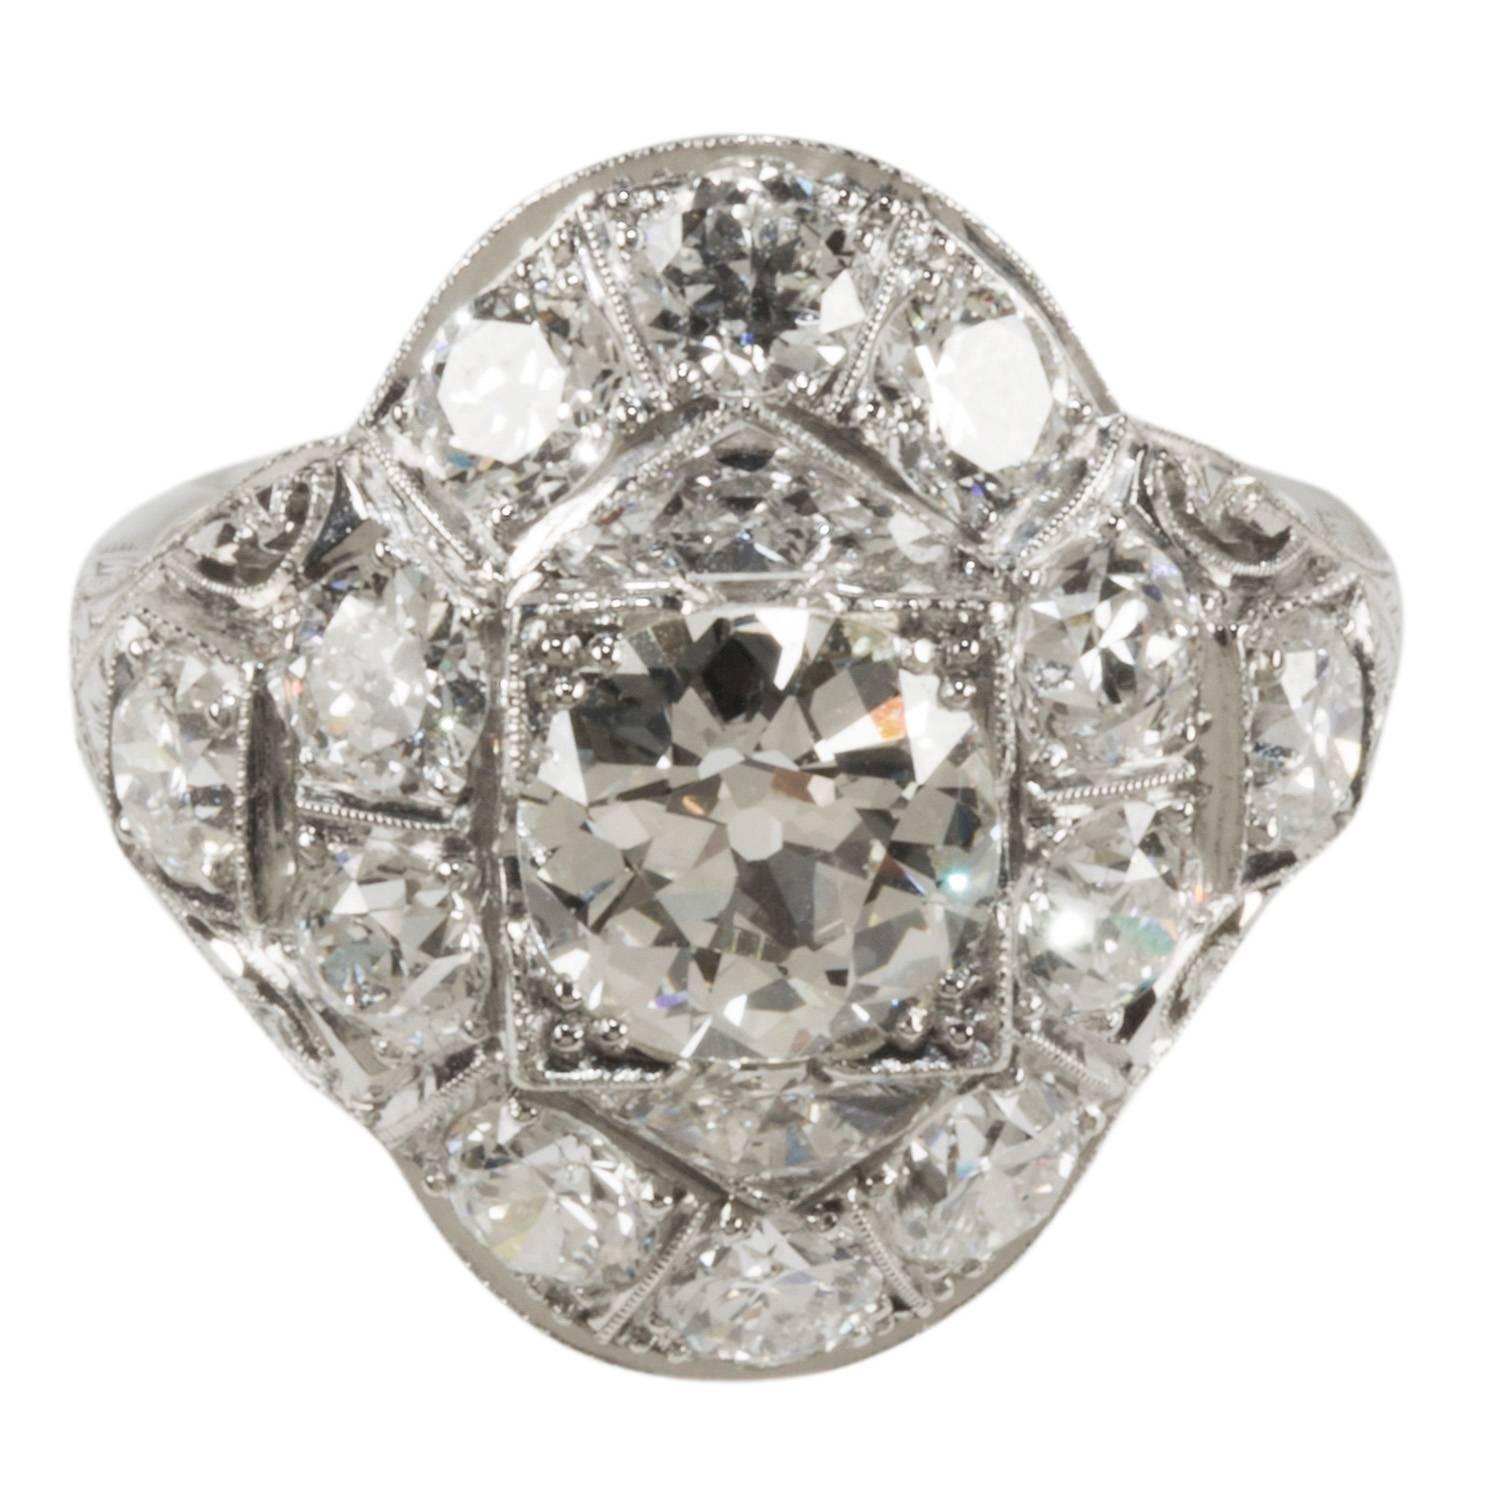 This is a lovely diamond cocktail ring set in platinum.  It is a size 8, but can easily be resized.  The center stone is 1.50cts and the side stones are approximately 2.50cts total weight.